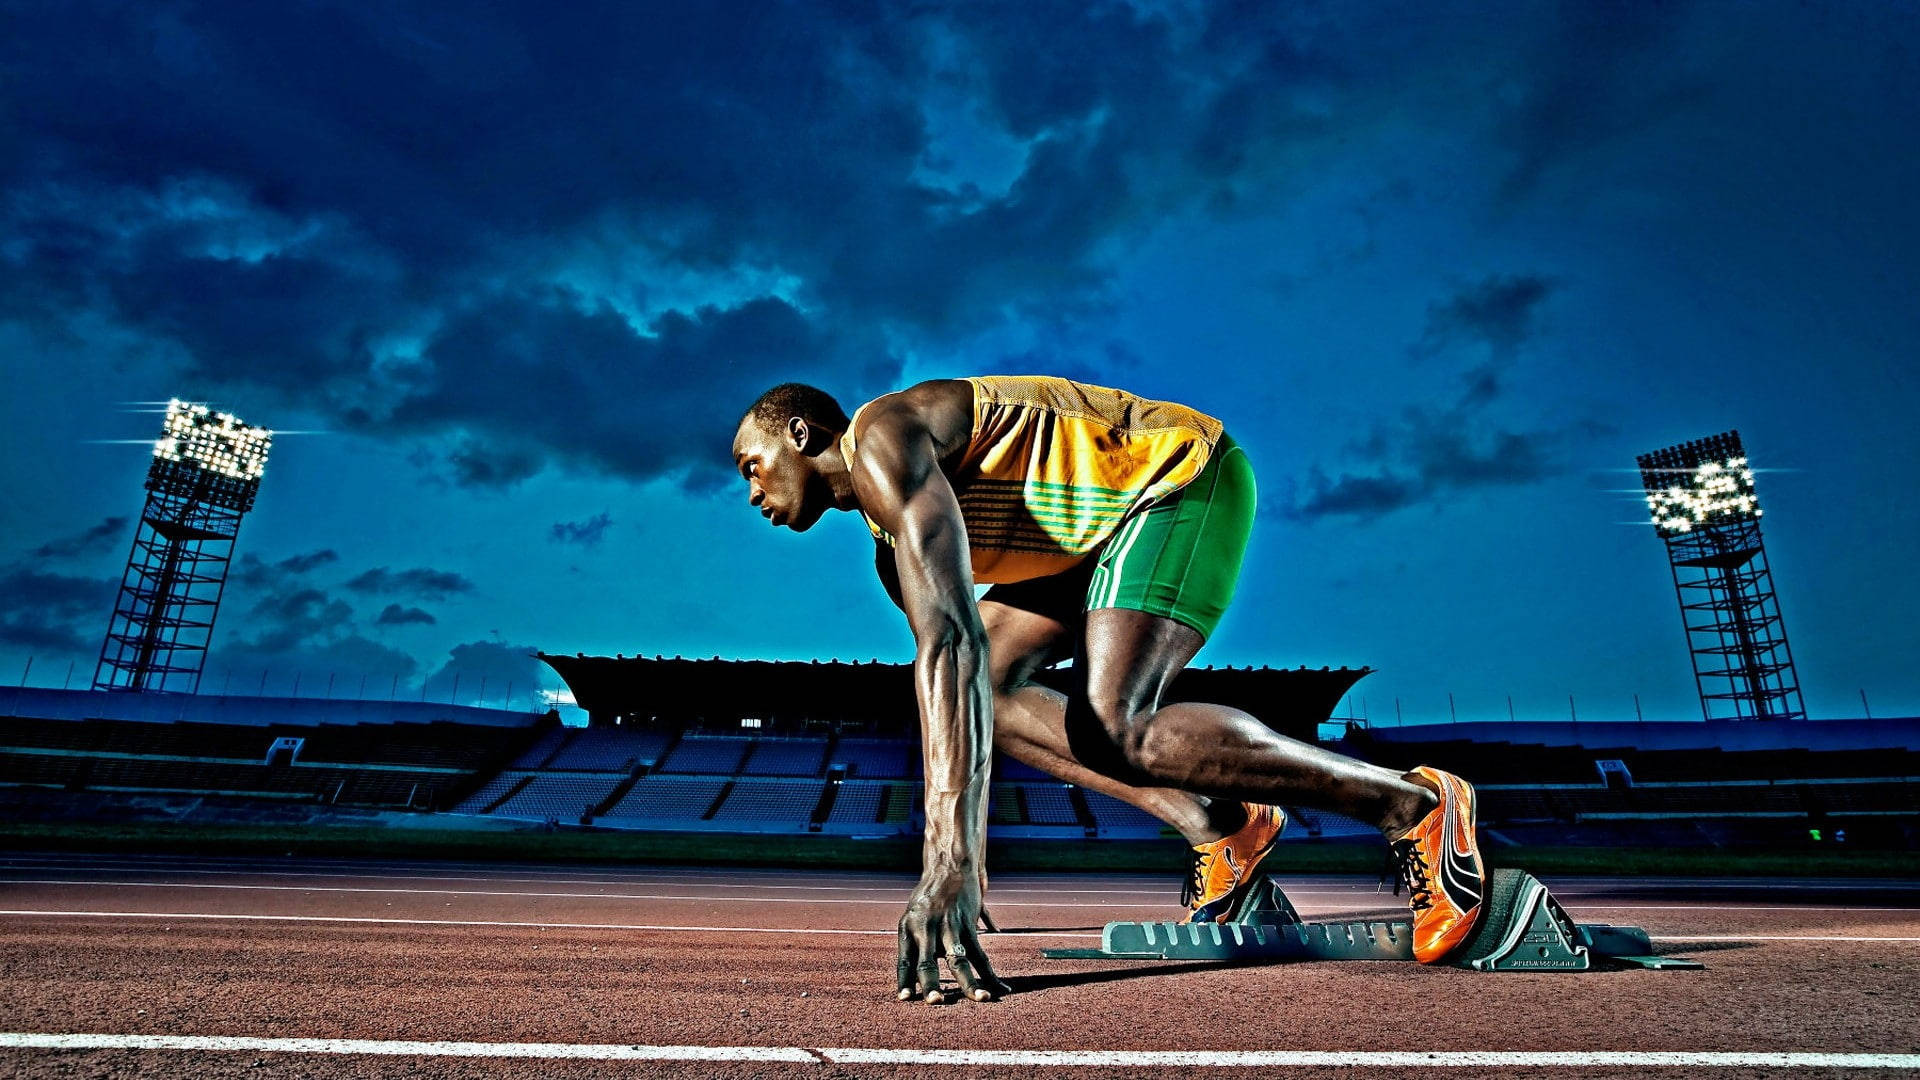 The Fastest Man Alive, Usain Bolt, Wins Yet Another Olympic Race Background